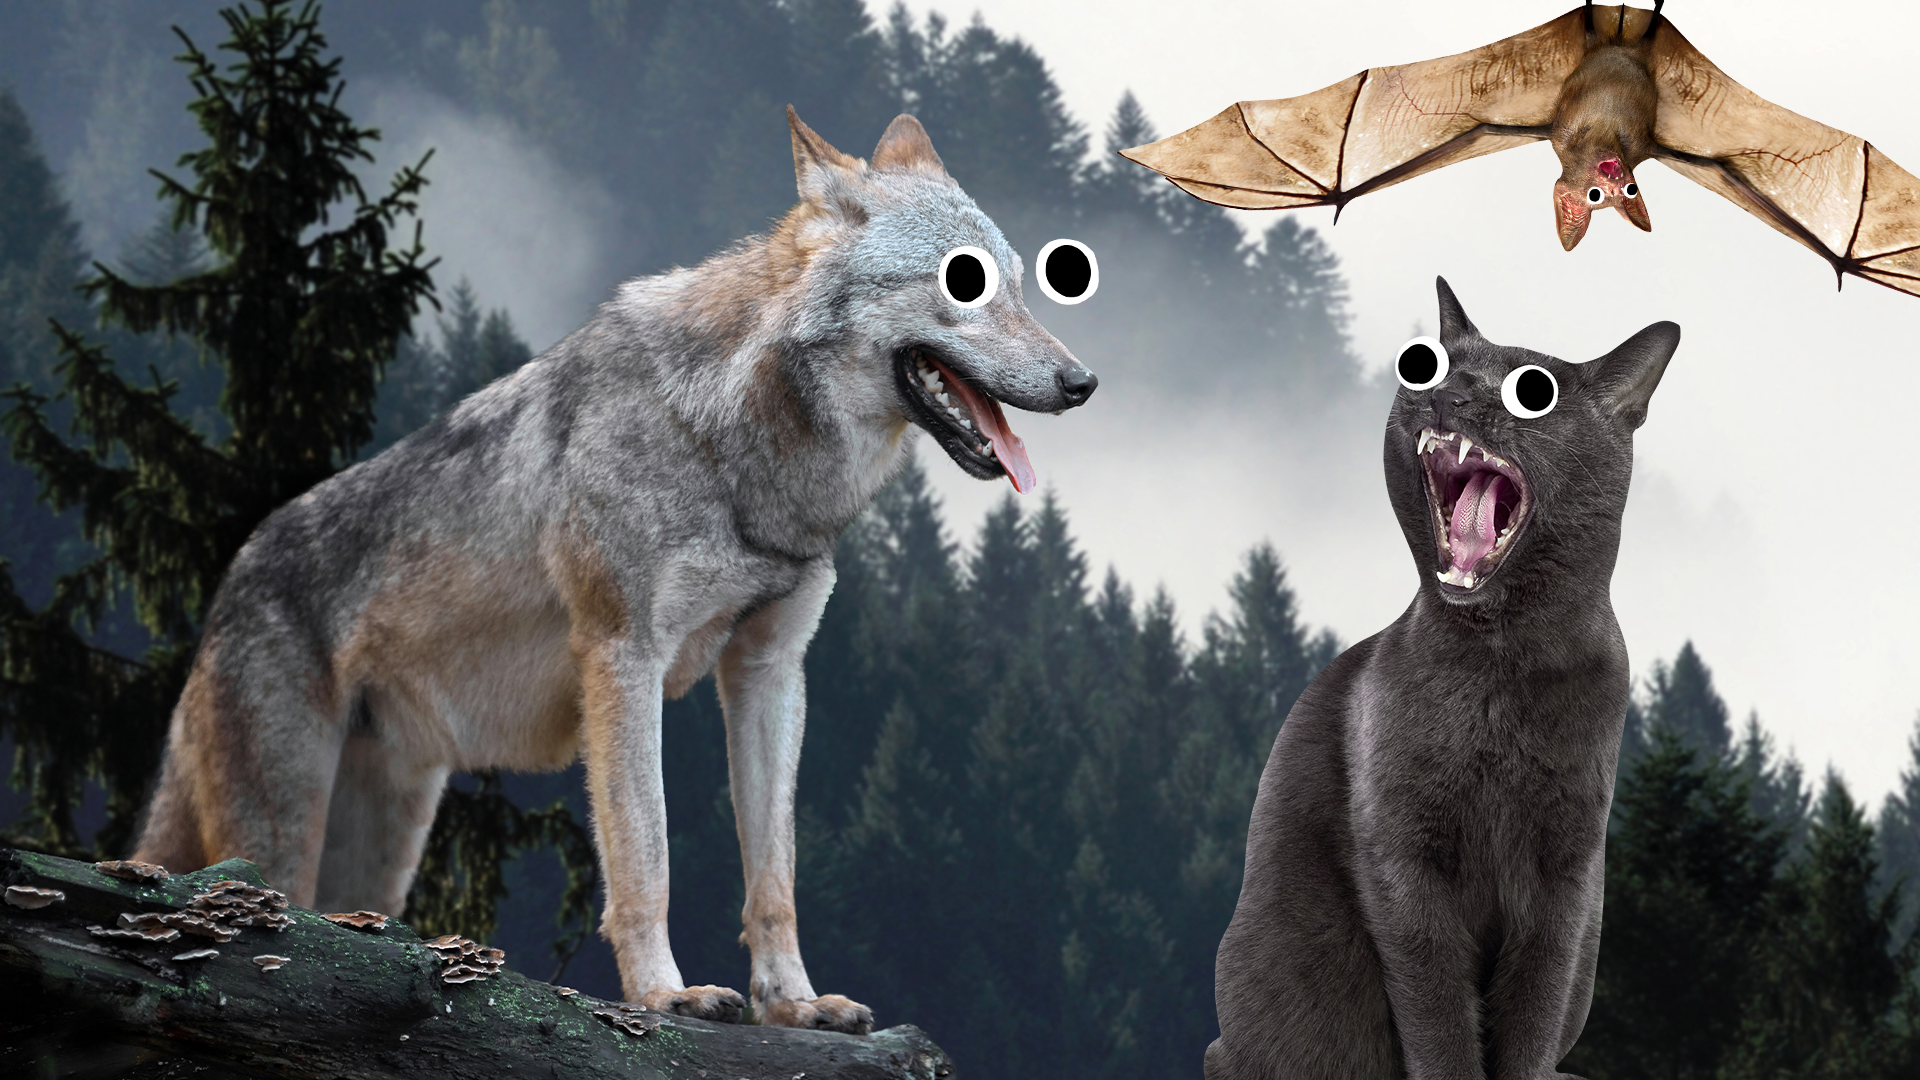 Wolf, bat and cat in forest with goofy eyes